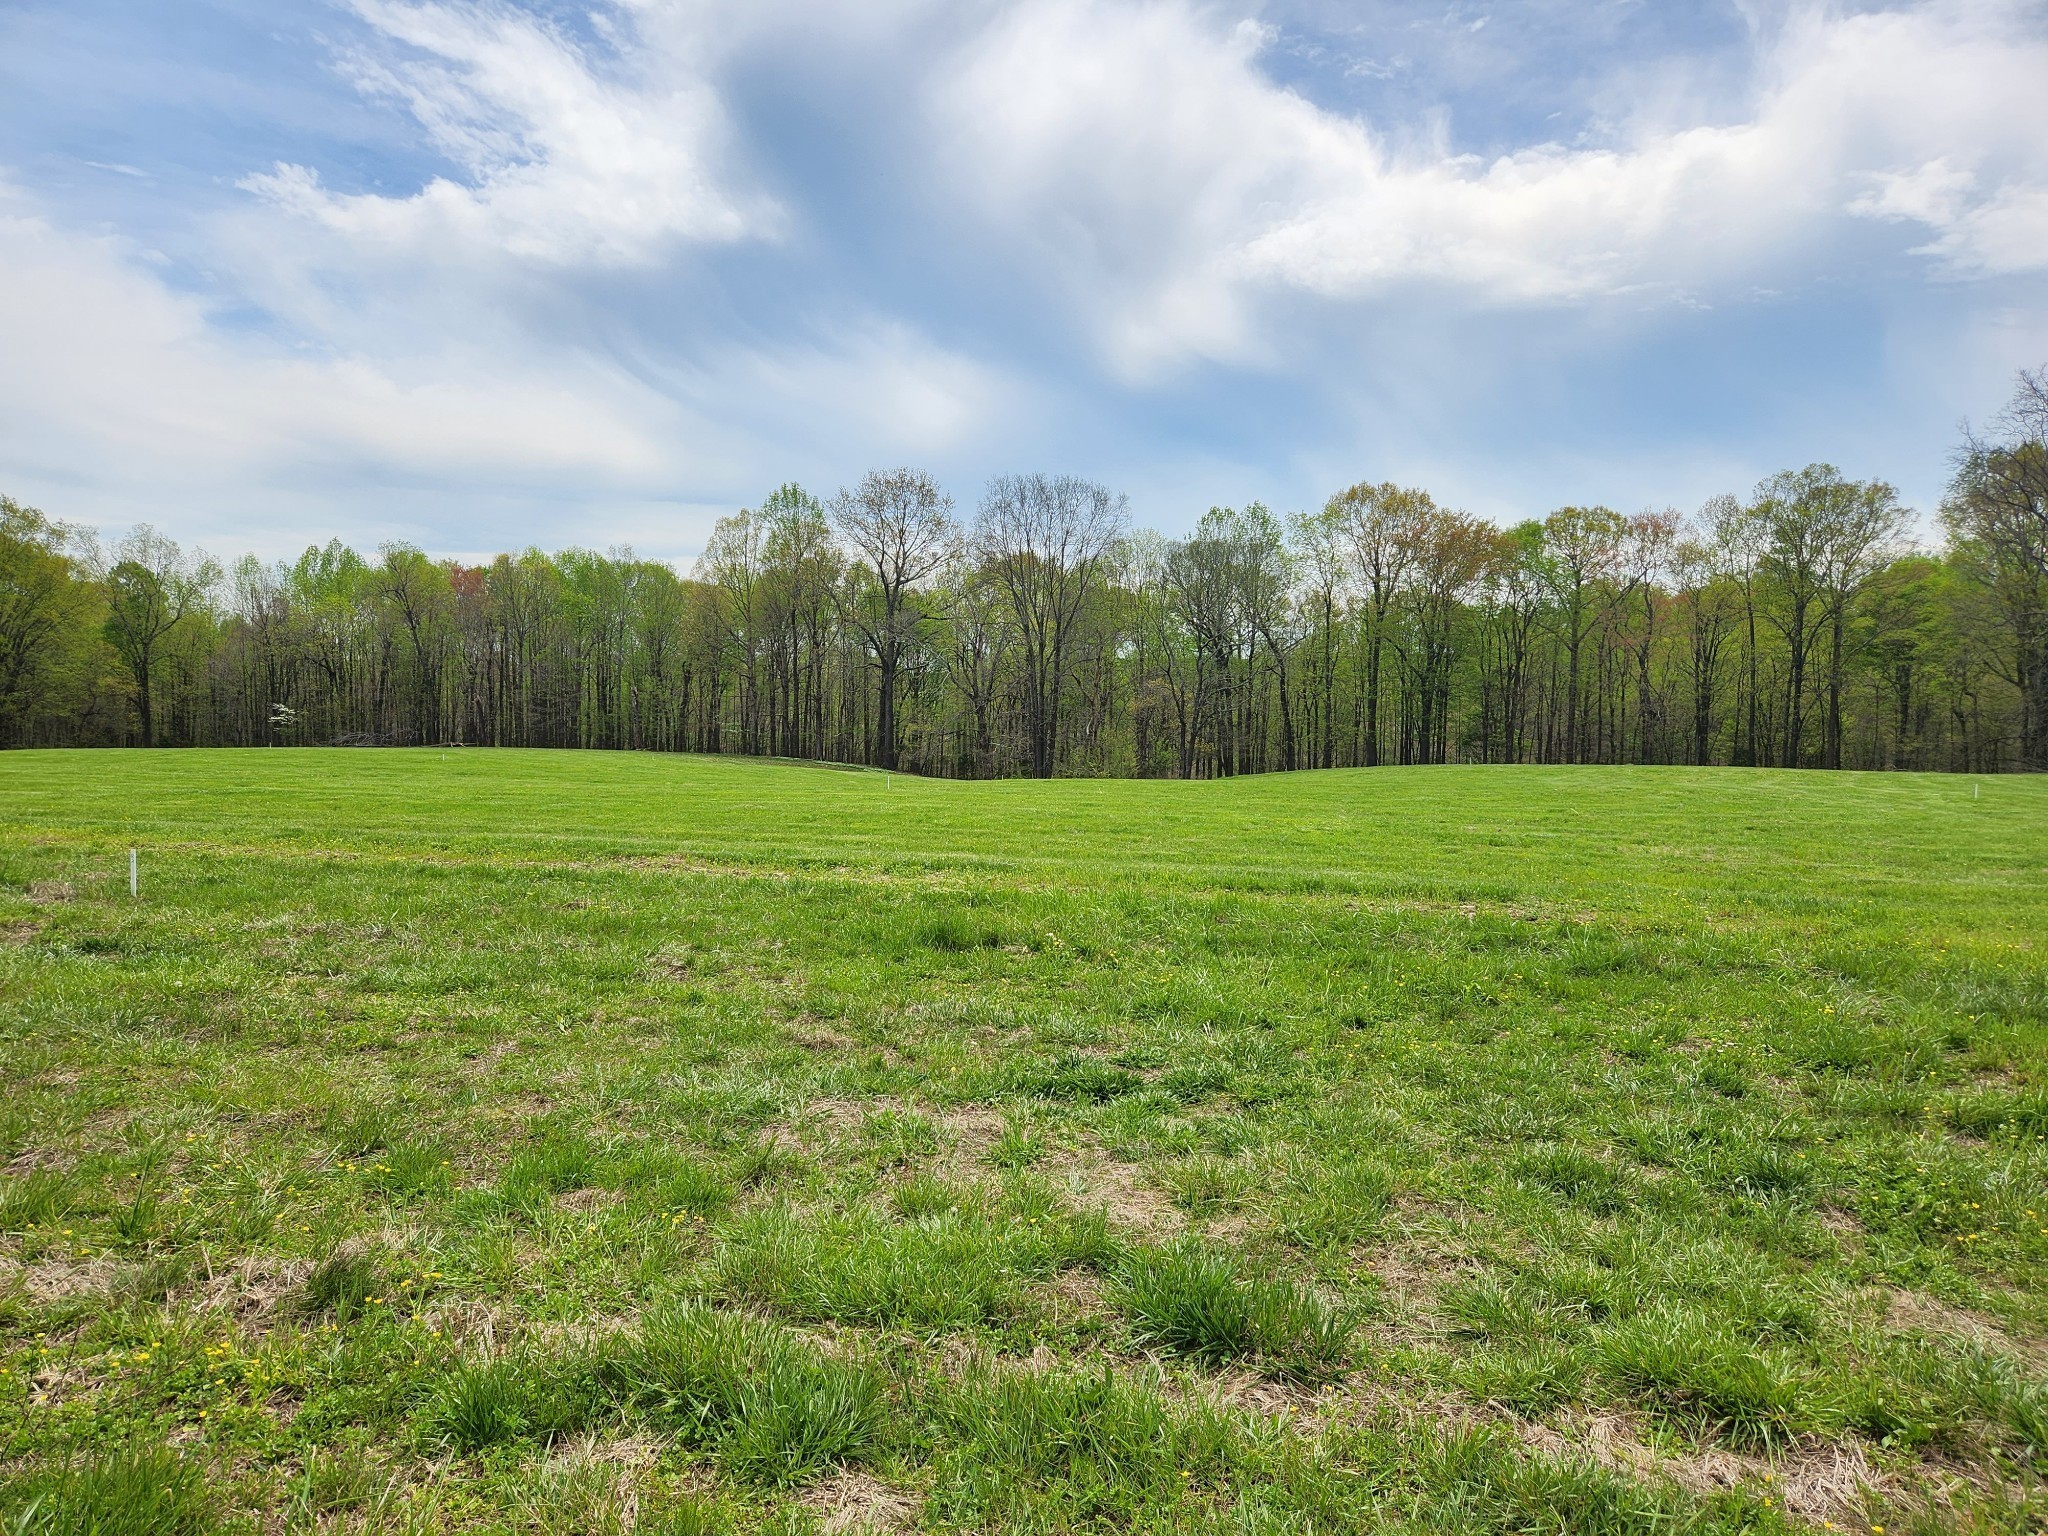 a view of grassy field with trees in the background